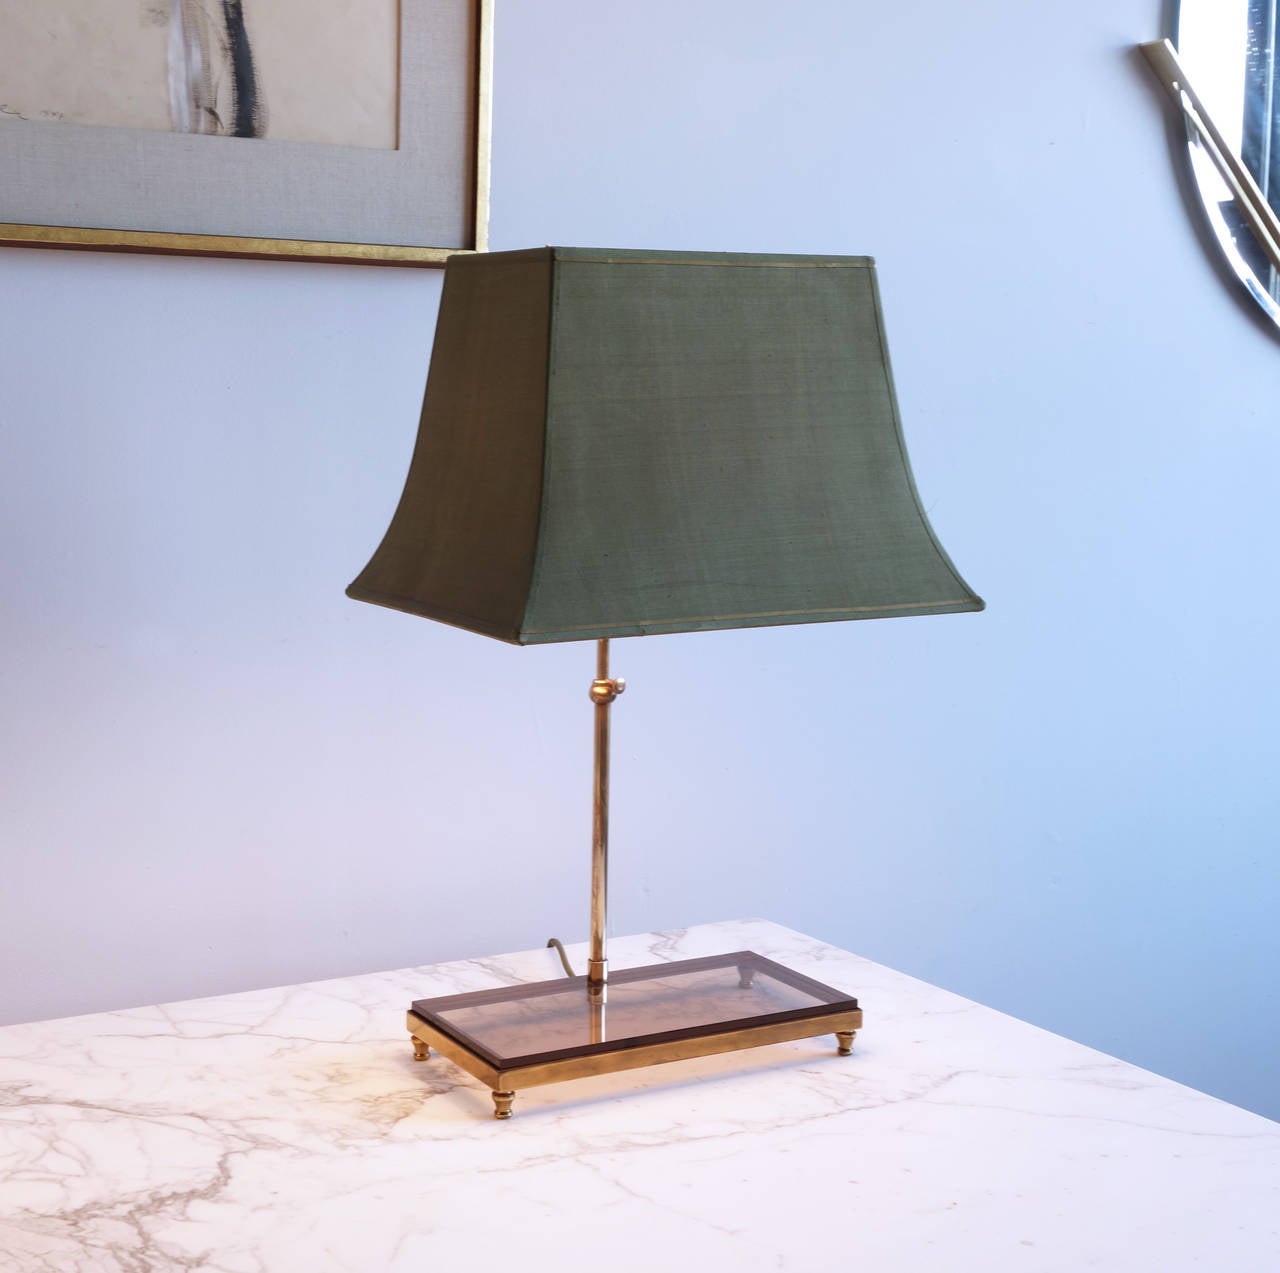 Wearing their original green silk bell shades, this pair of table lamps has a quiet and stately beauty. The slender stems are set in a smoky acrylic rectangle which rests in a bronze frame with four ball feet.

16